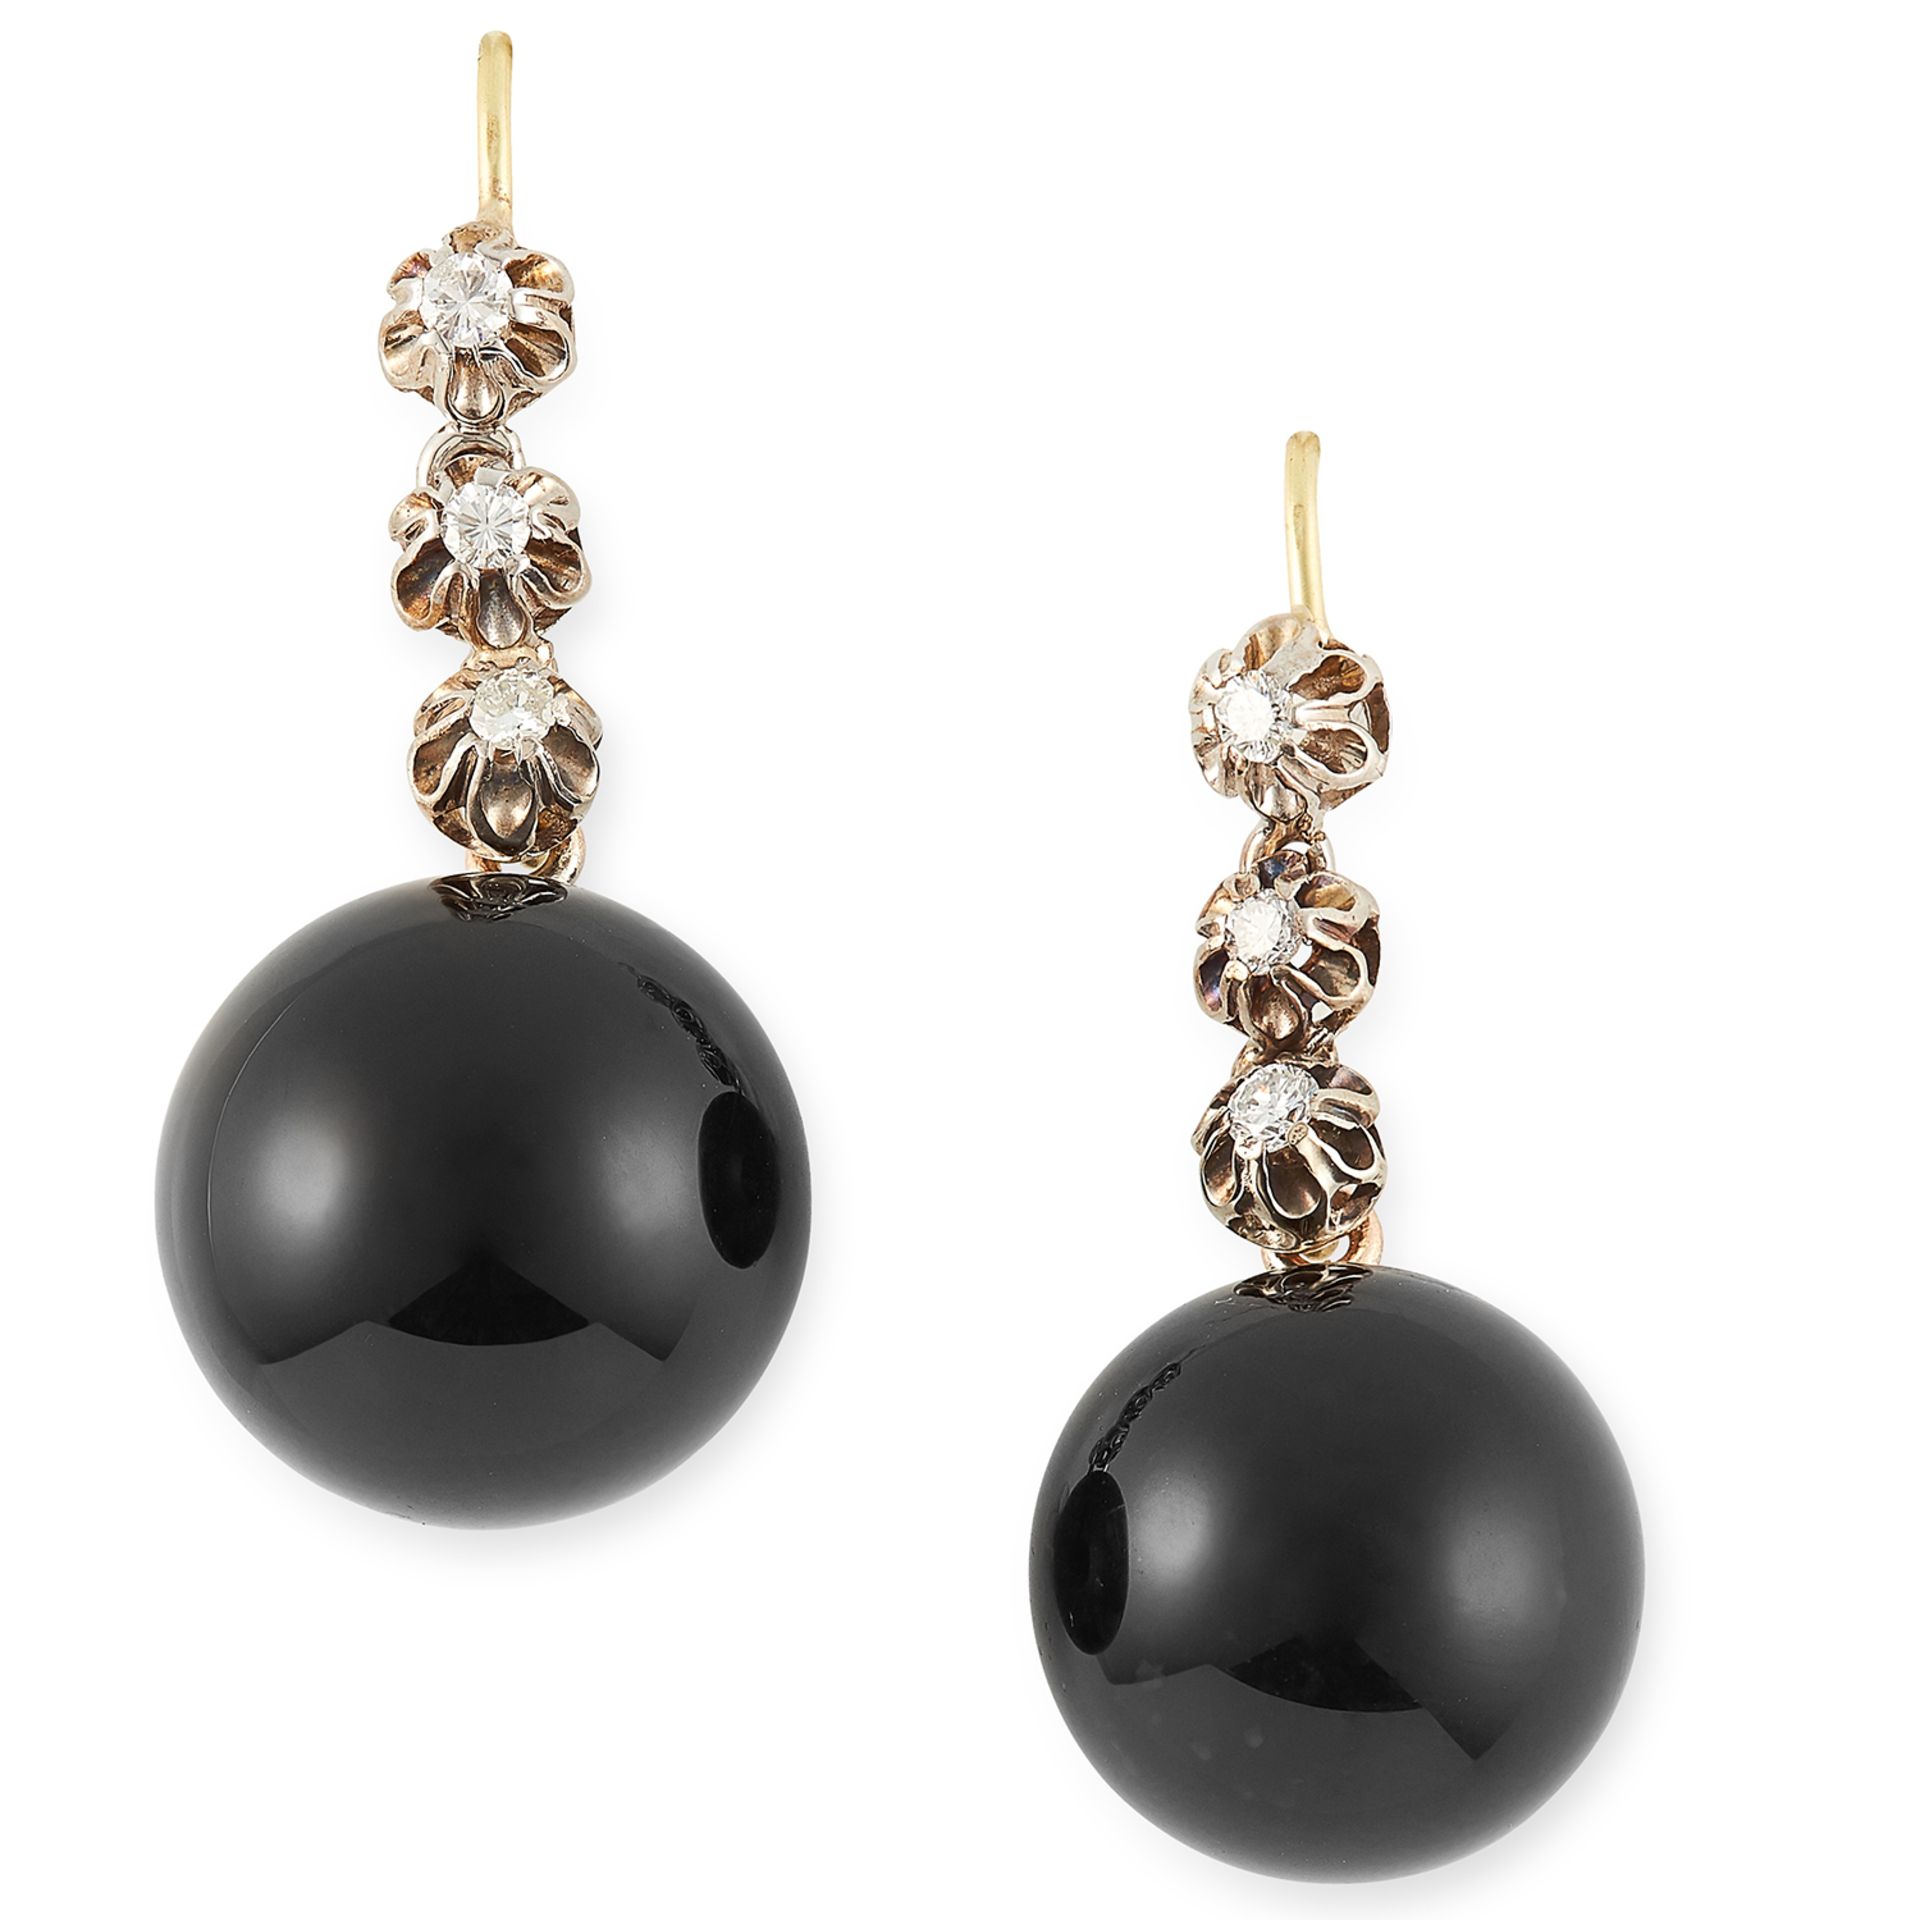 ONYX AND DIAMOND EARRINGS set with polished onyx drops and round cut diamonds, 3.5cm, 10g.